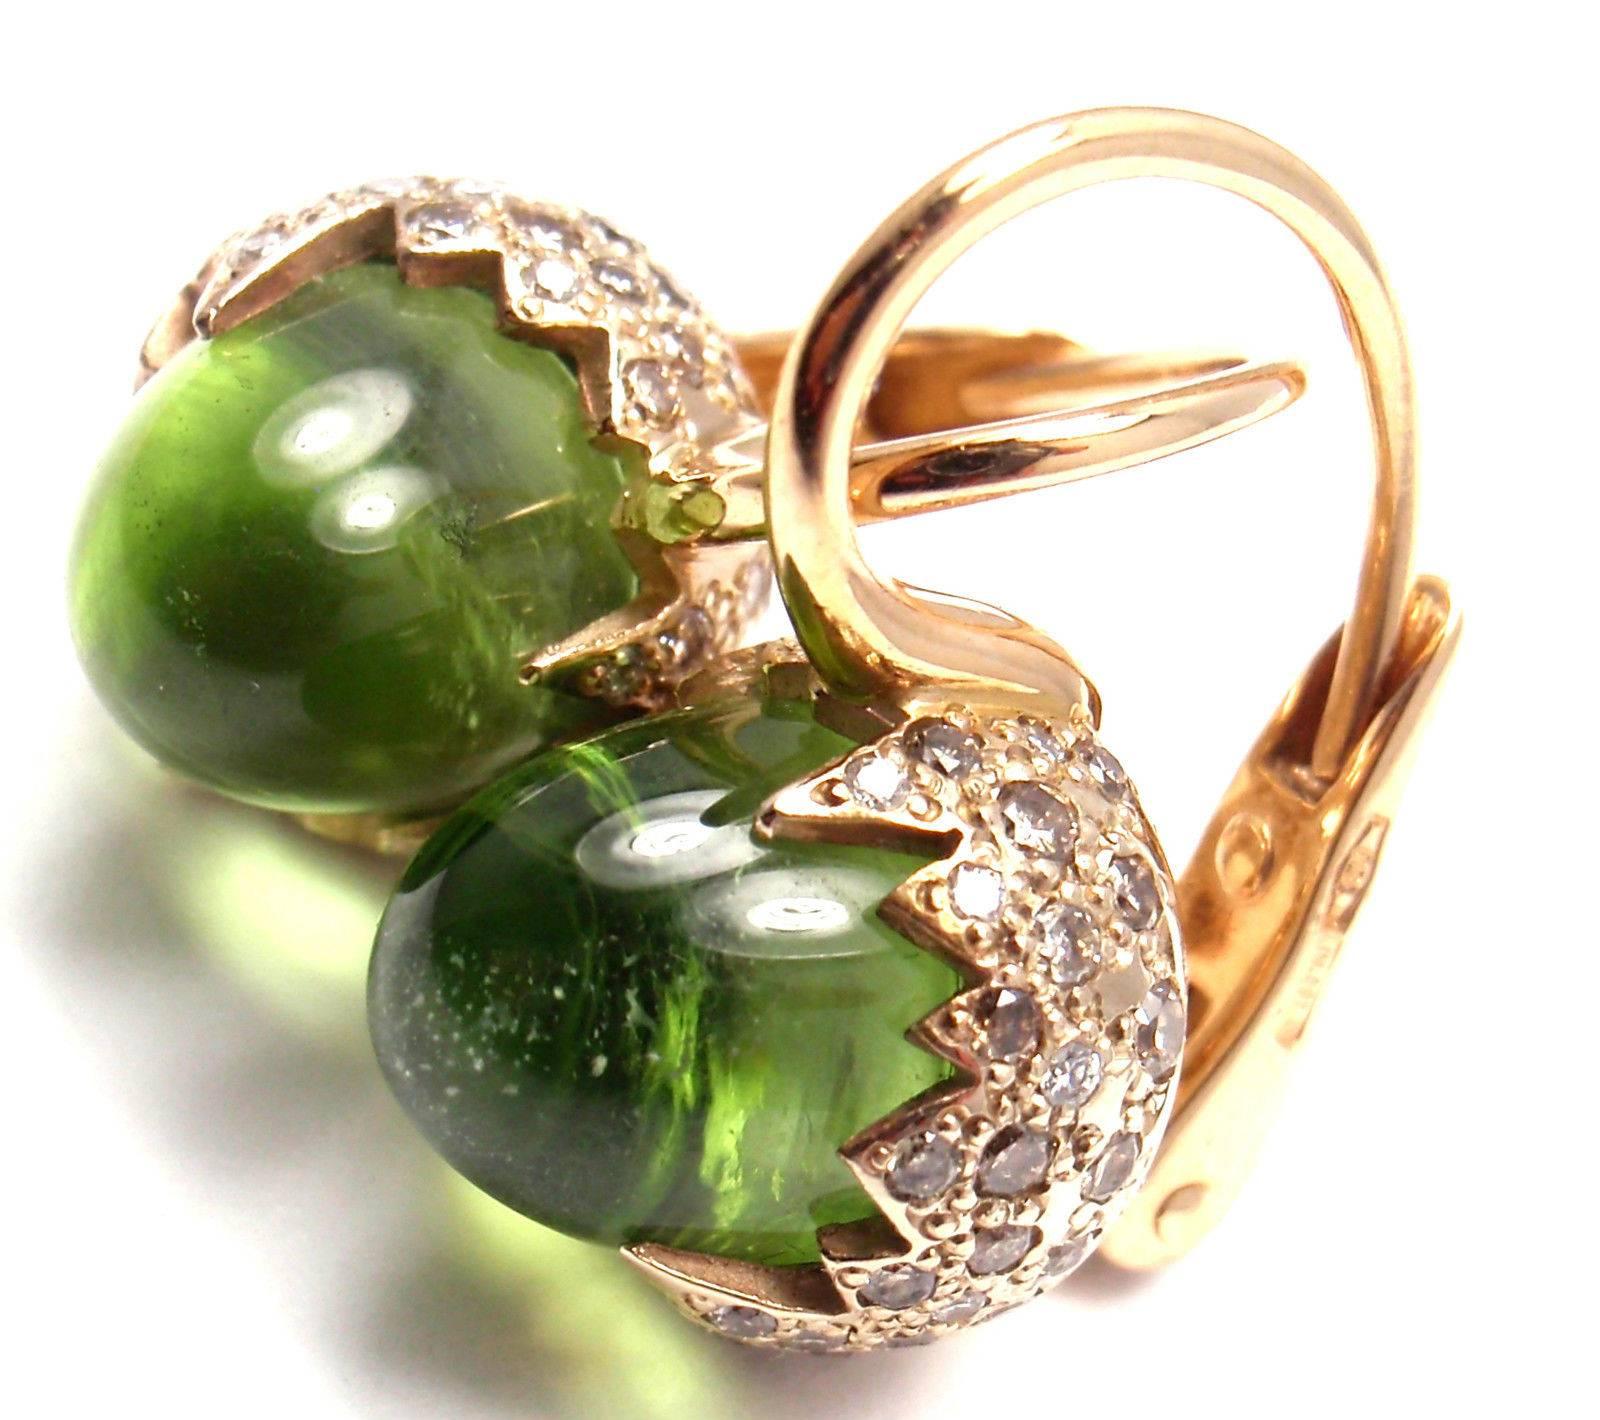 18k Rose & White Gold Peridot Diamond Chimera Earrings by Pomellato.
With 120 round brilliant cut diamonds VS1 clarity, G color total weight approx. .90ct
2 peridots

These earrings come with original Pomellato box and a